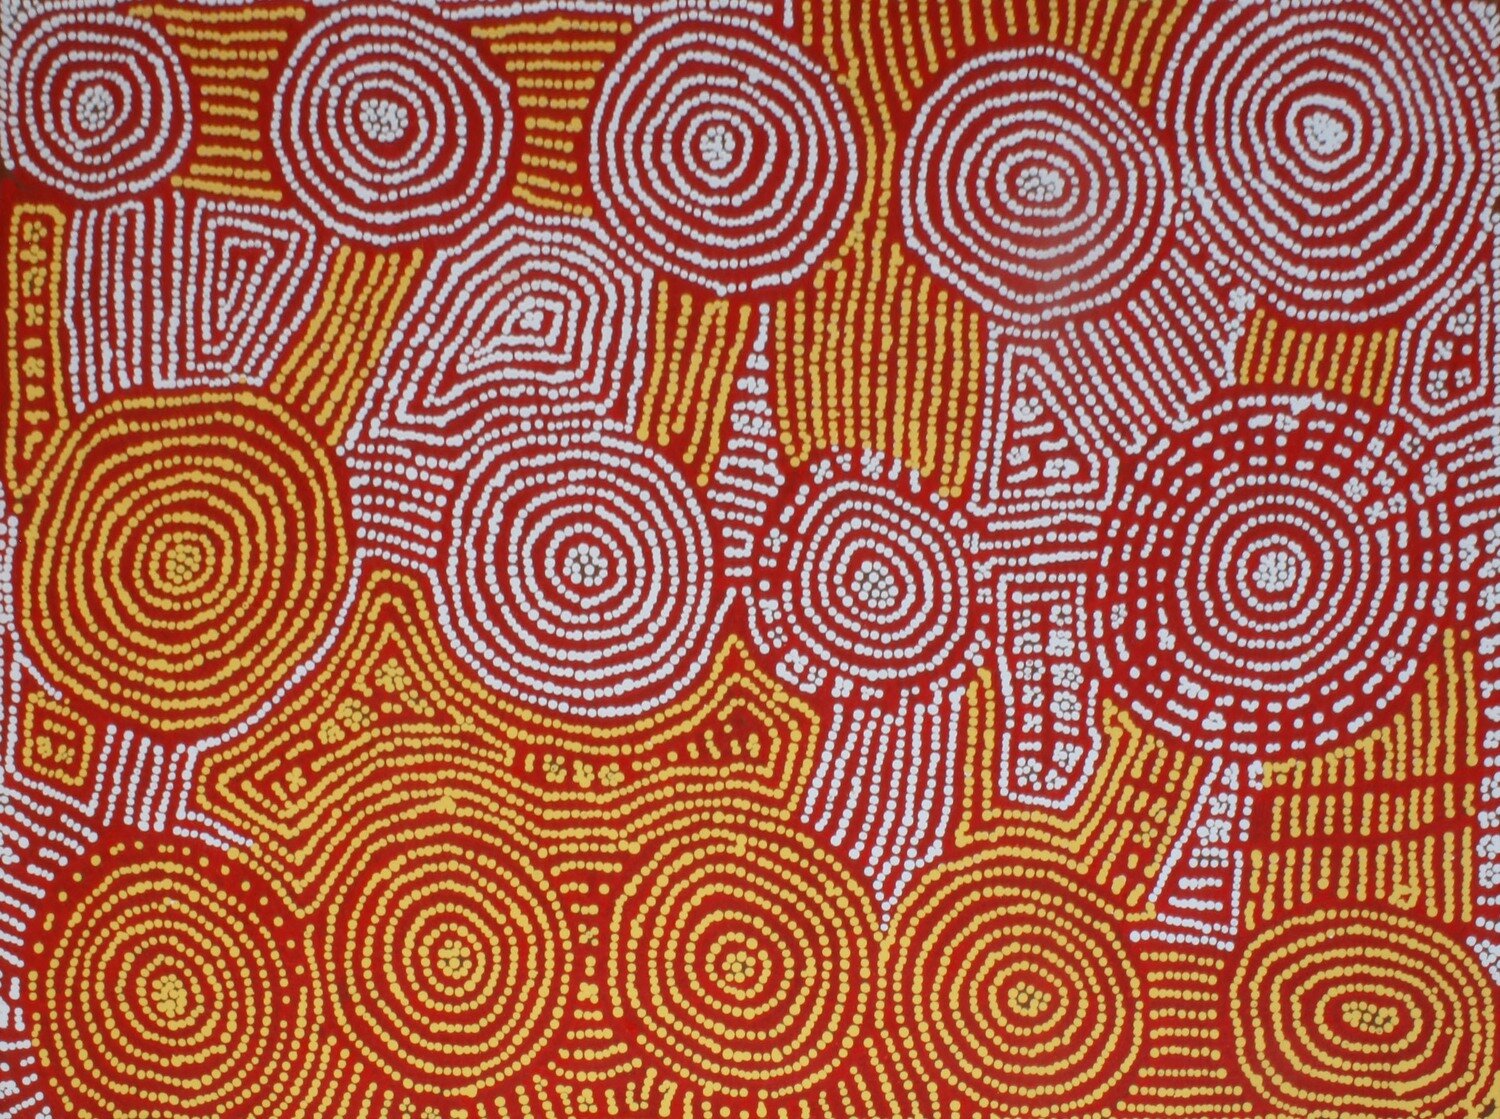 Tingari Cycle 2005 by Barney Campbell Tjakamarra
91x122cm Cat 9384BC